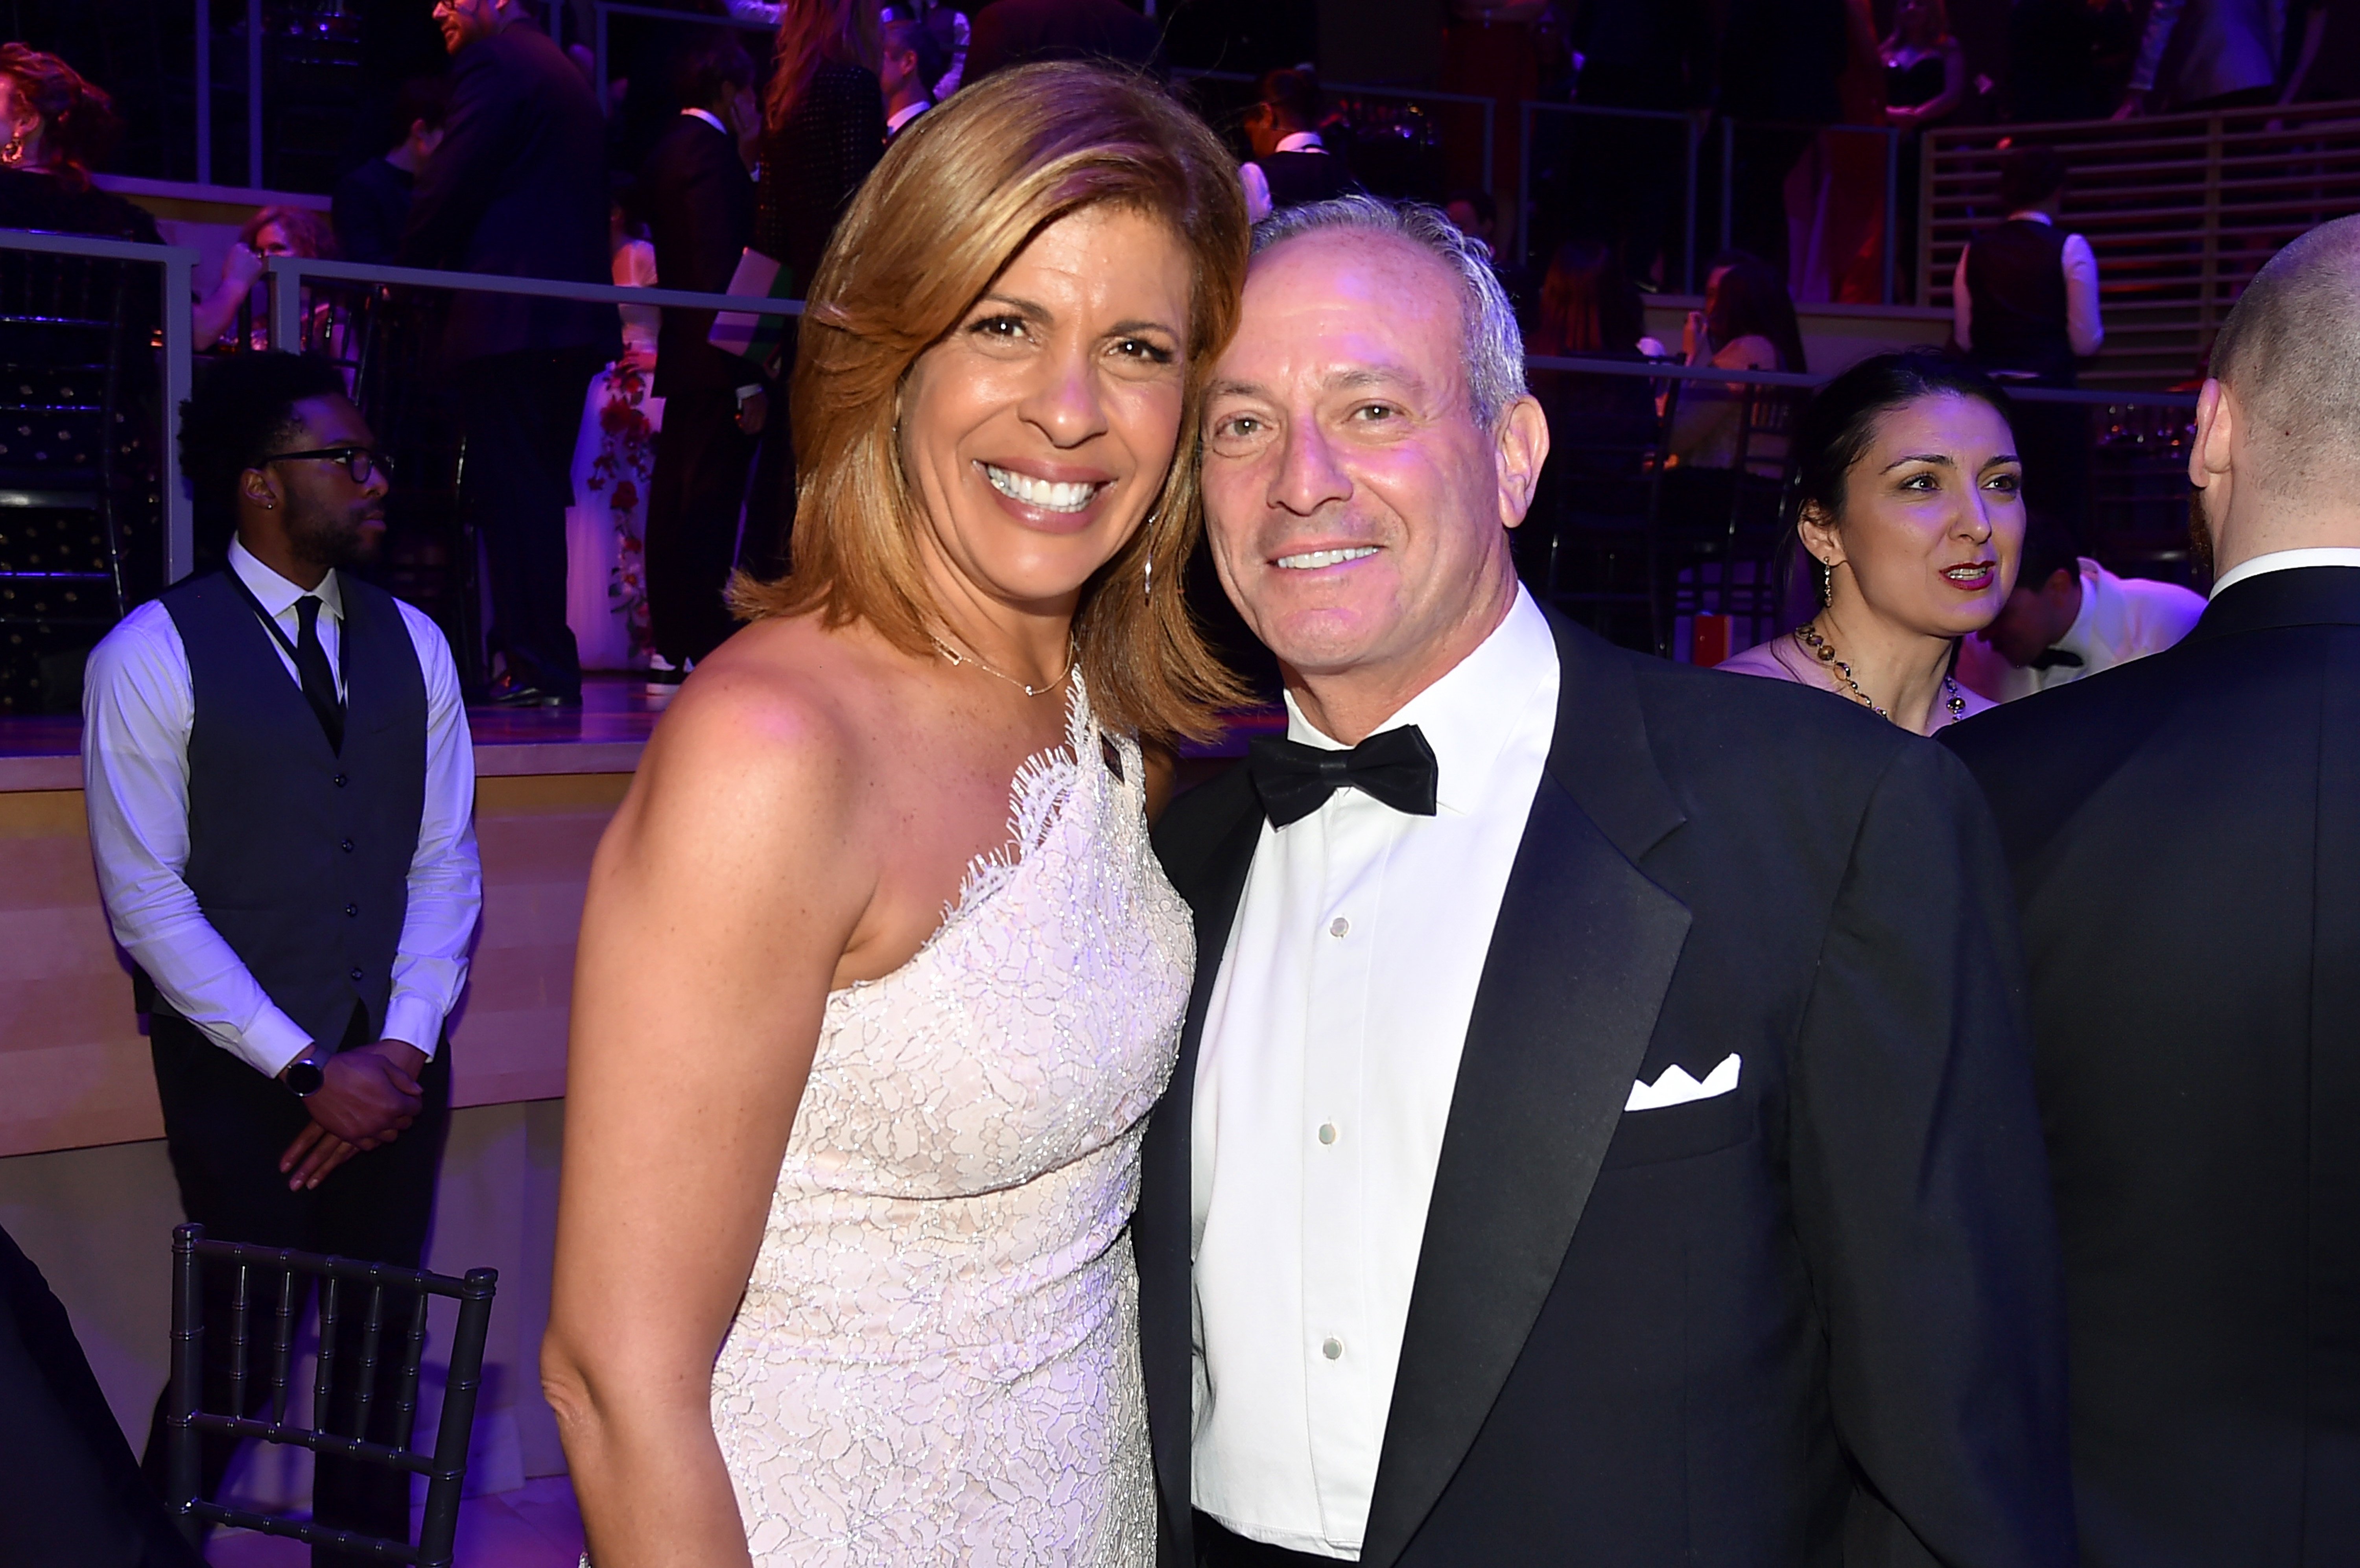 Hoda Kotb and Joel Schiffman attend the 2018 TIME 100 Gala at Jazz at Lincoln Center on April 24, 2018 in New York City. | Source: Getty Images